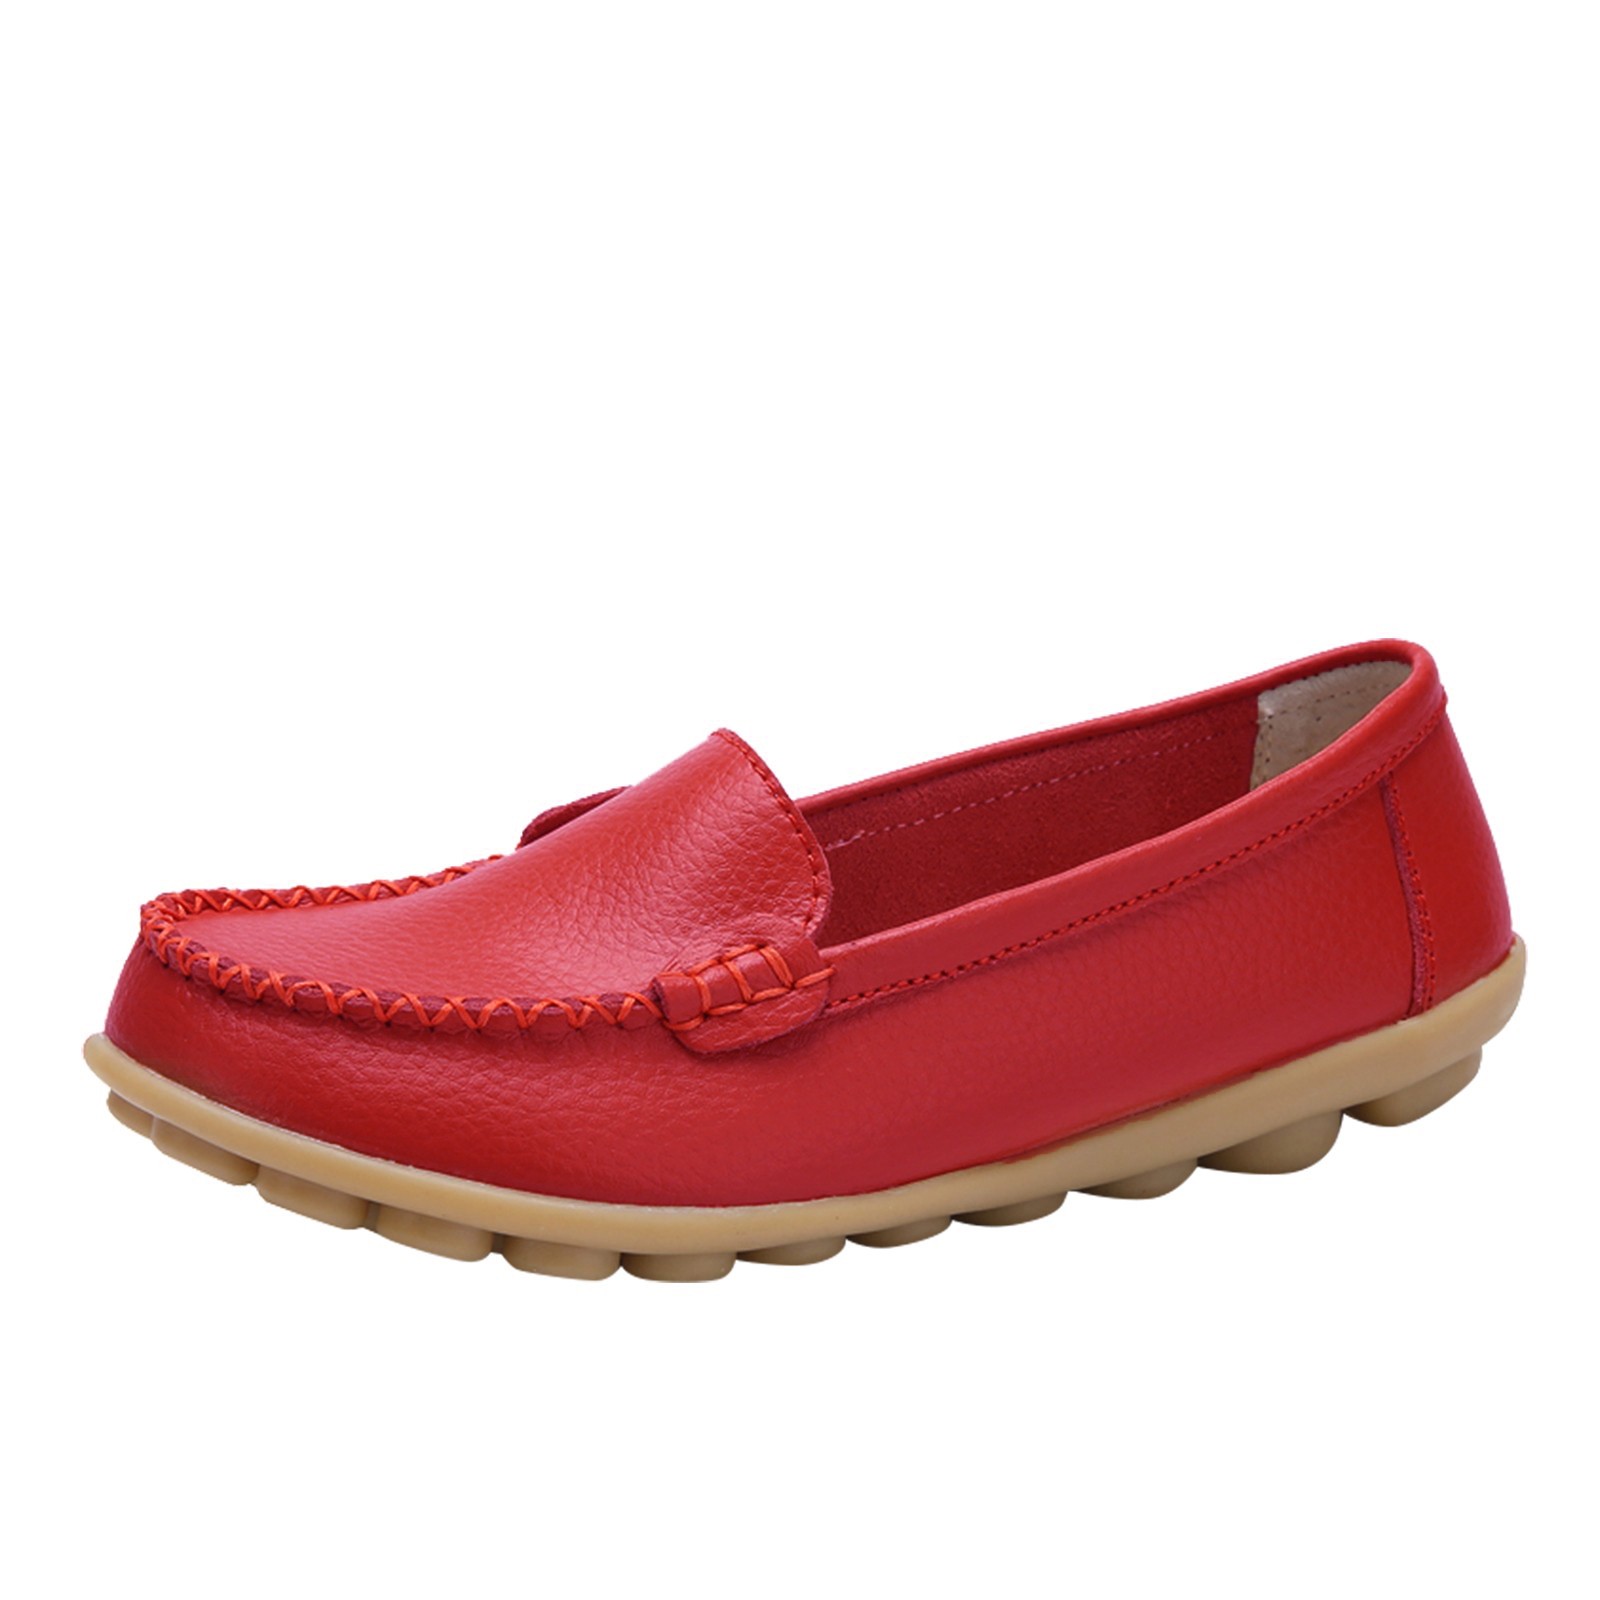 dress shoes with wide toe box women’s